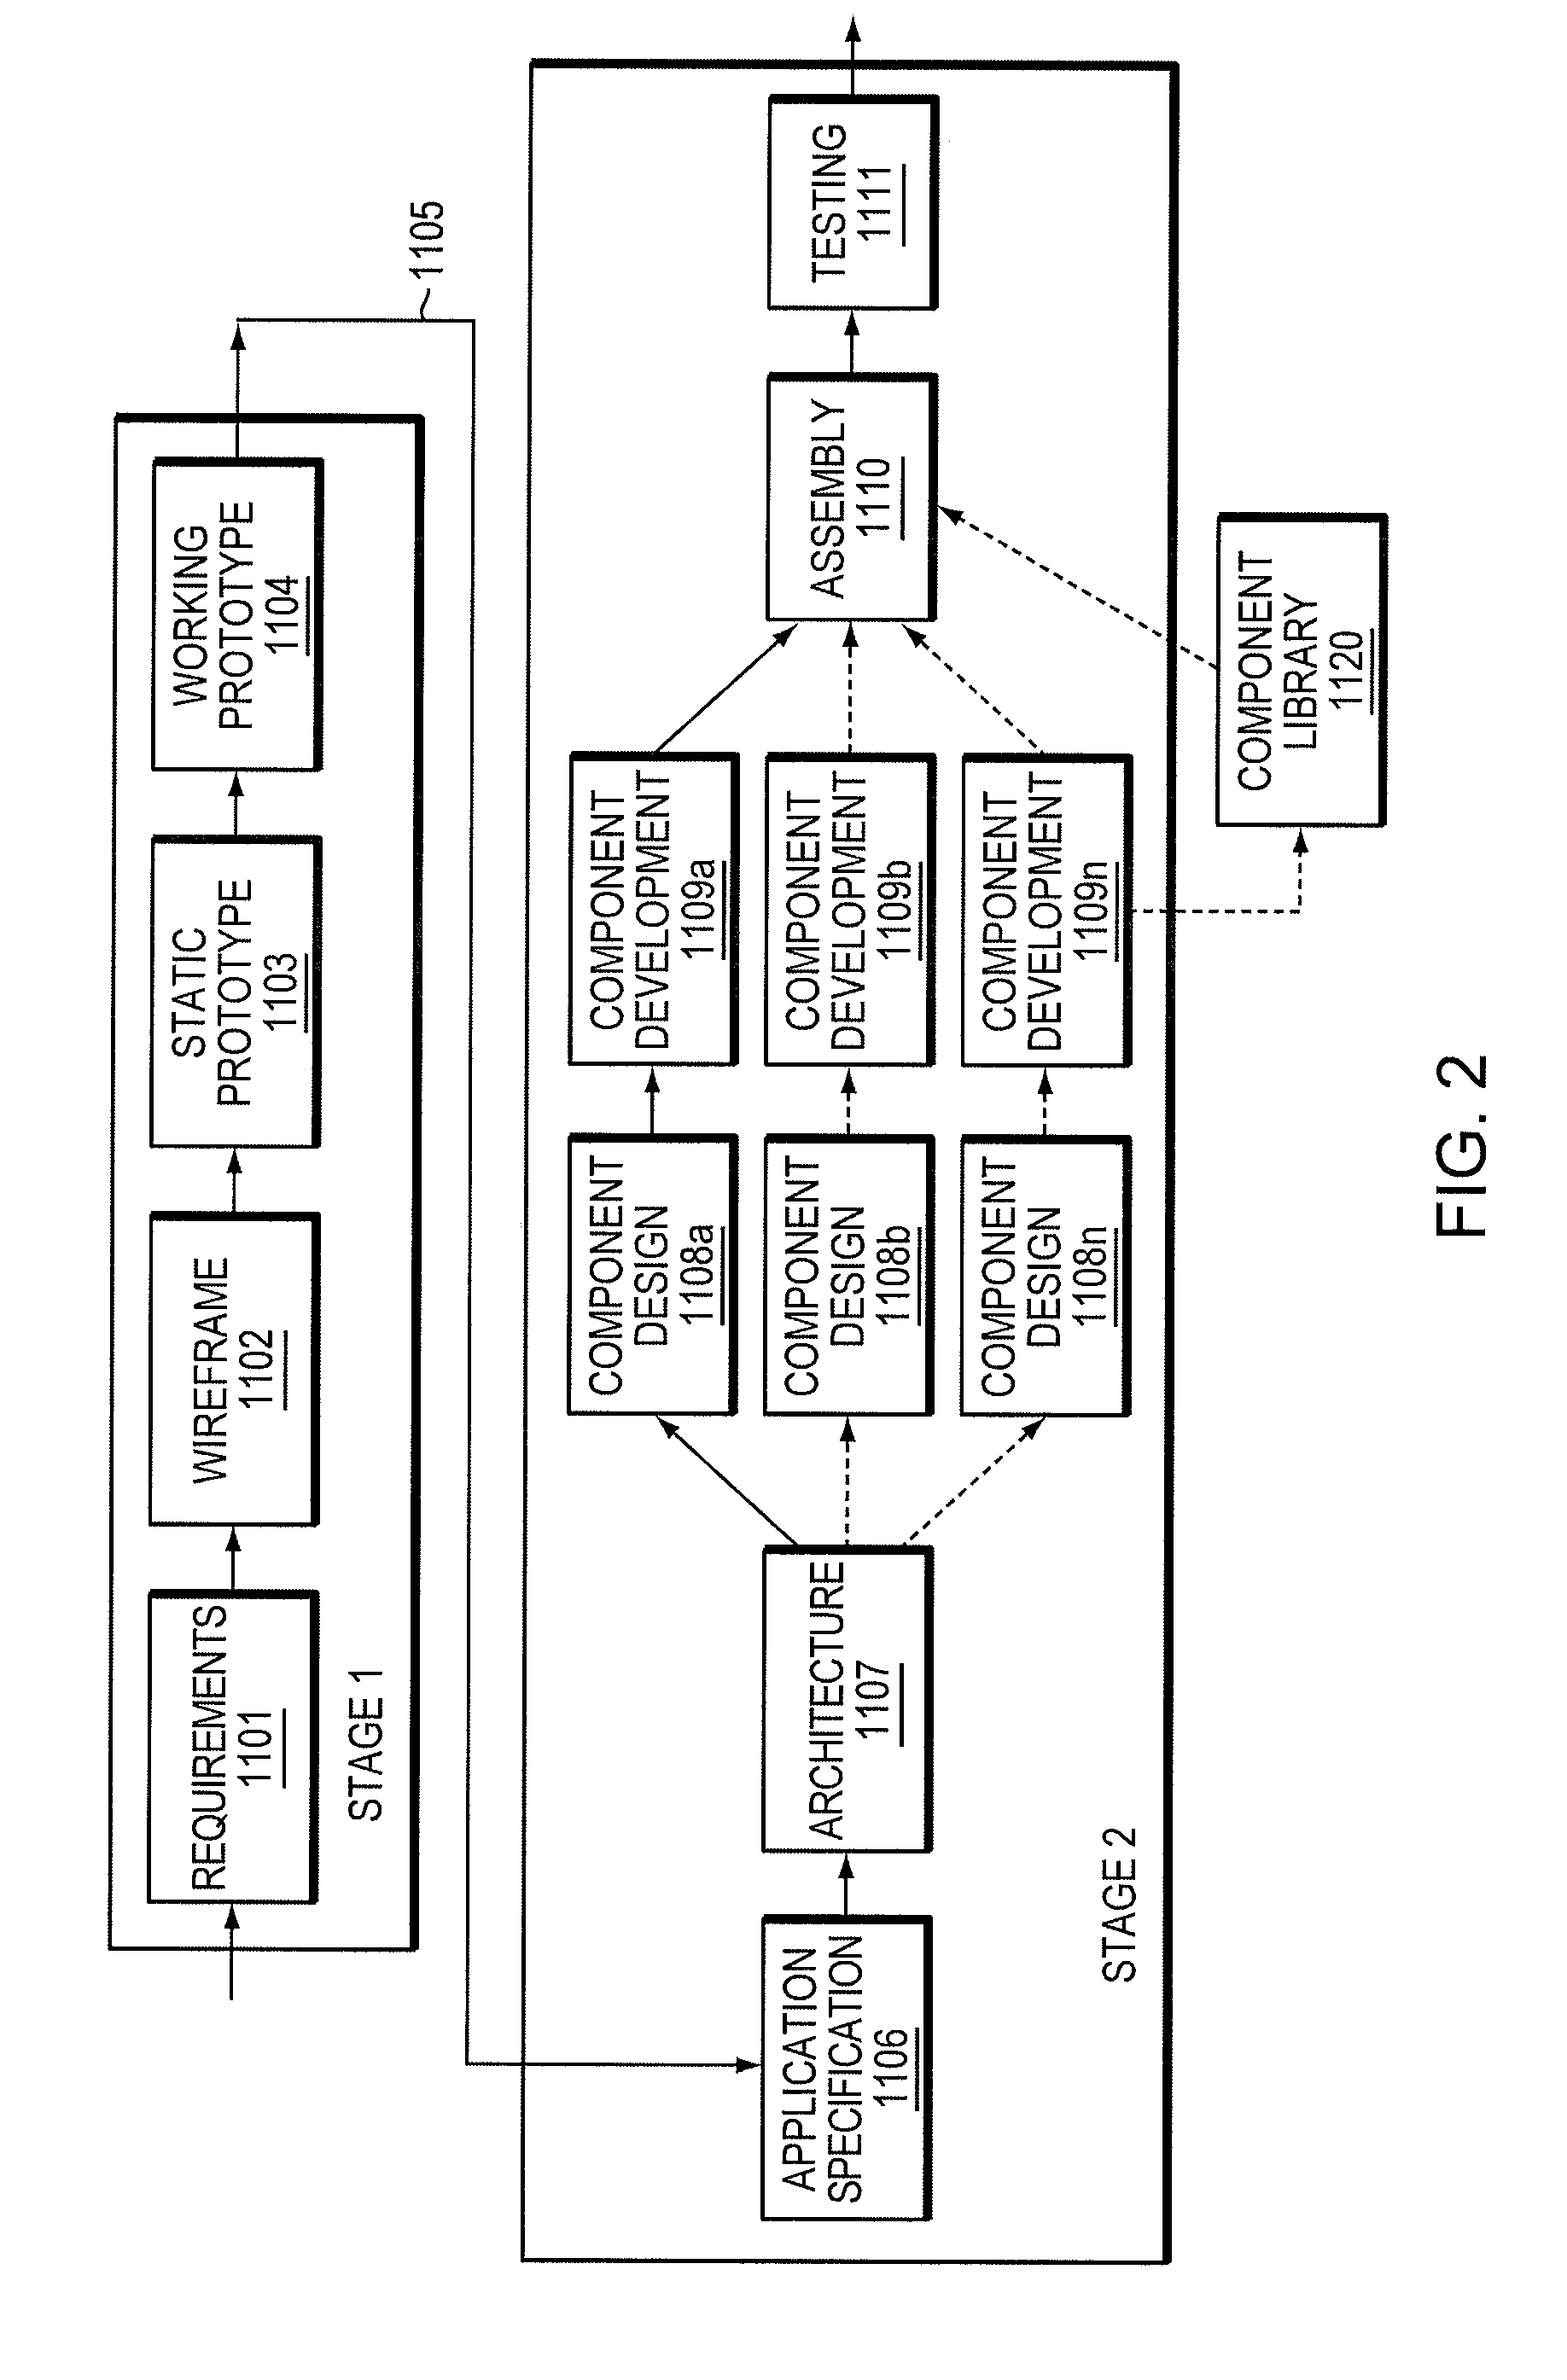 System and method for software development